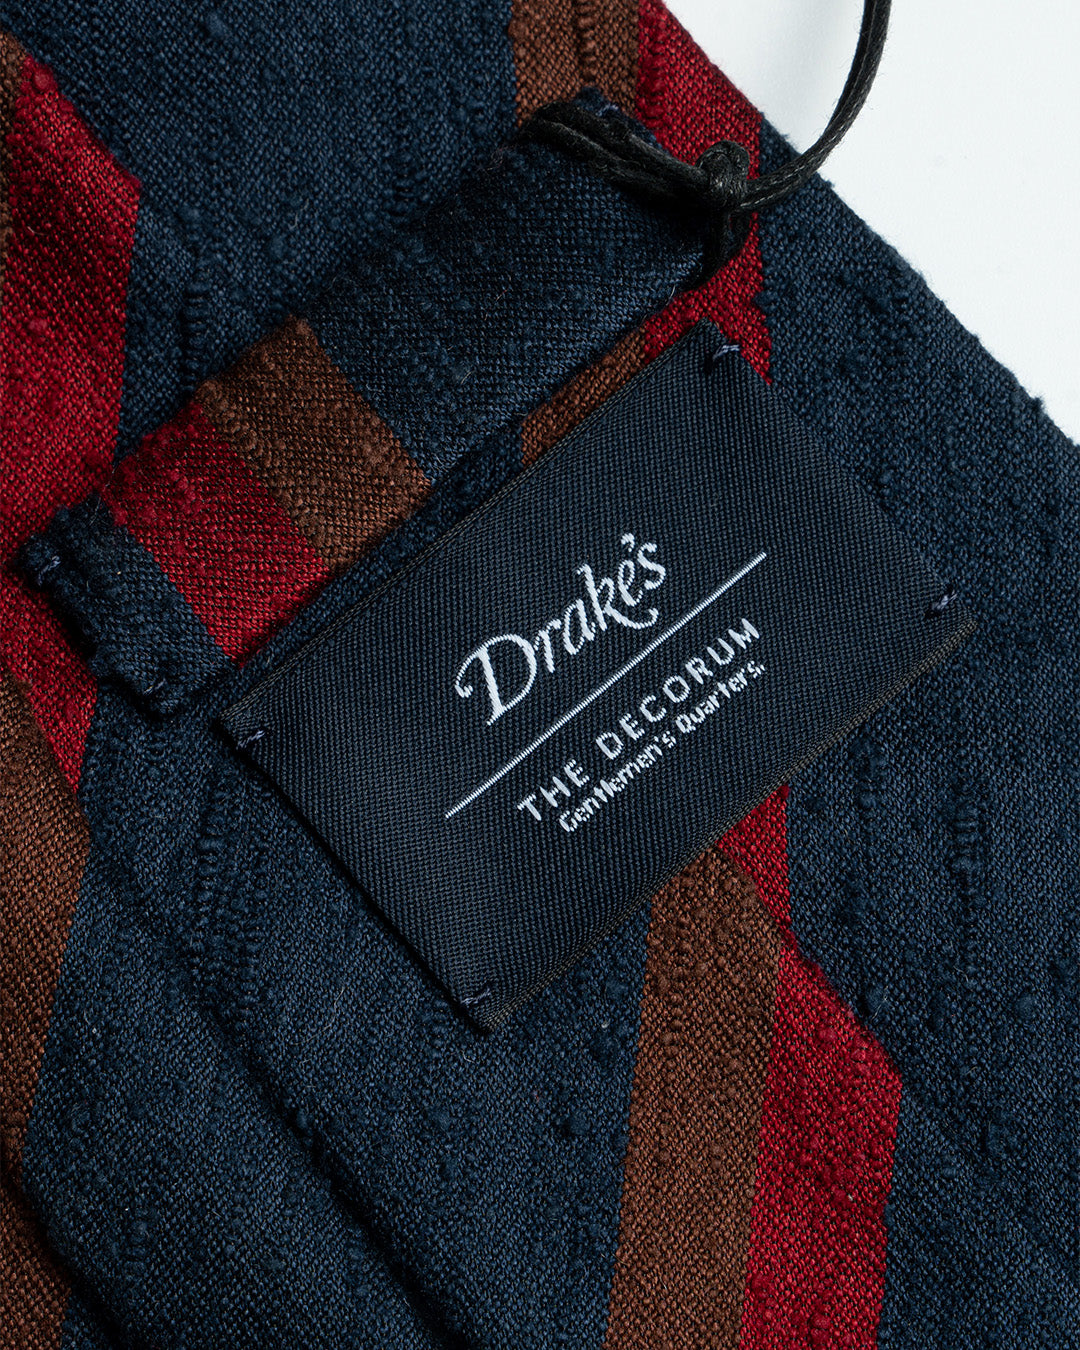 Drake’s archival tie collection for The Decorum⁠ - Red/Brown stripe